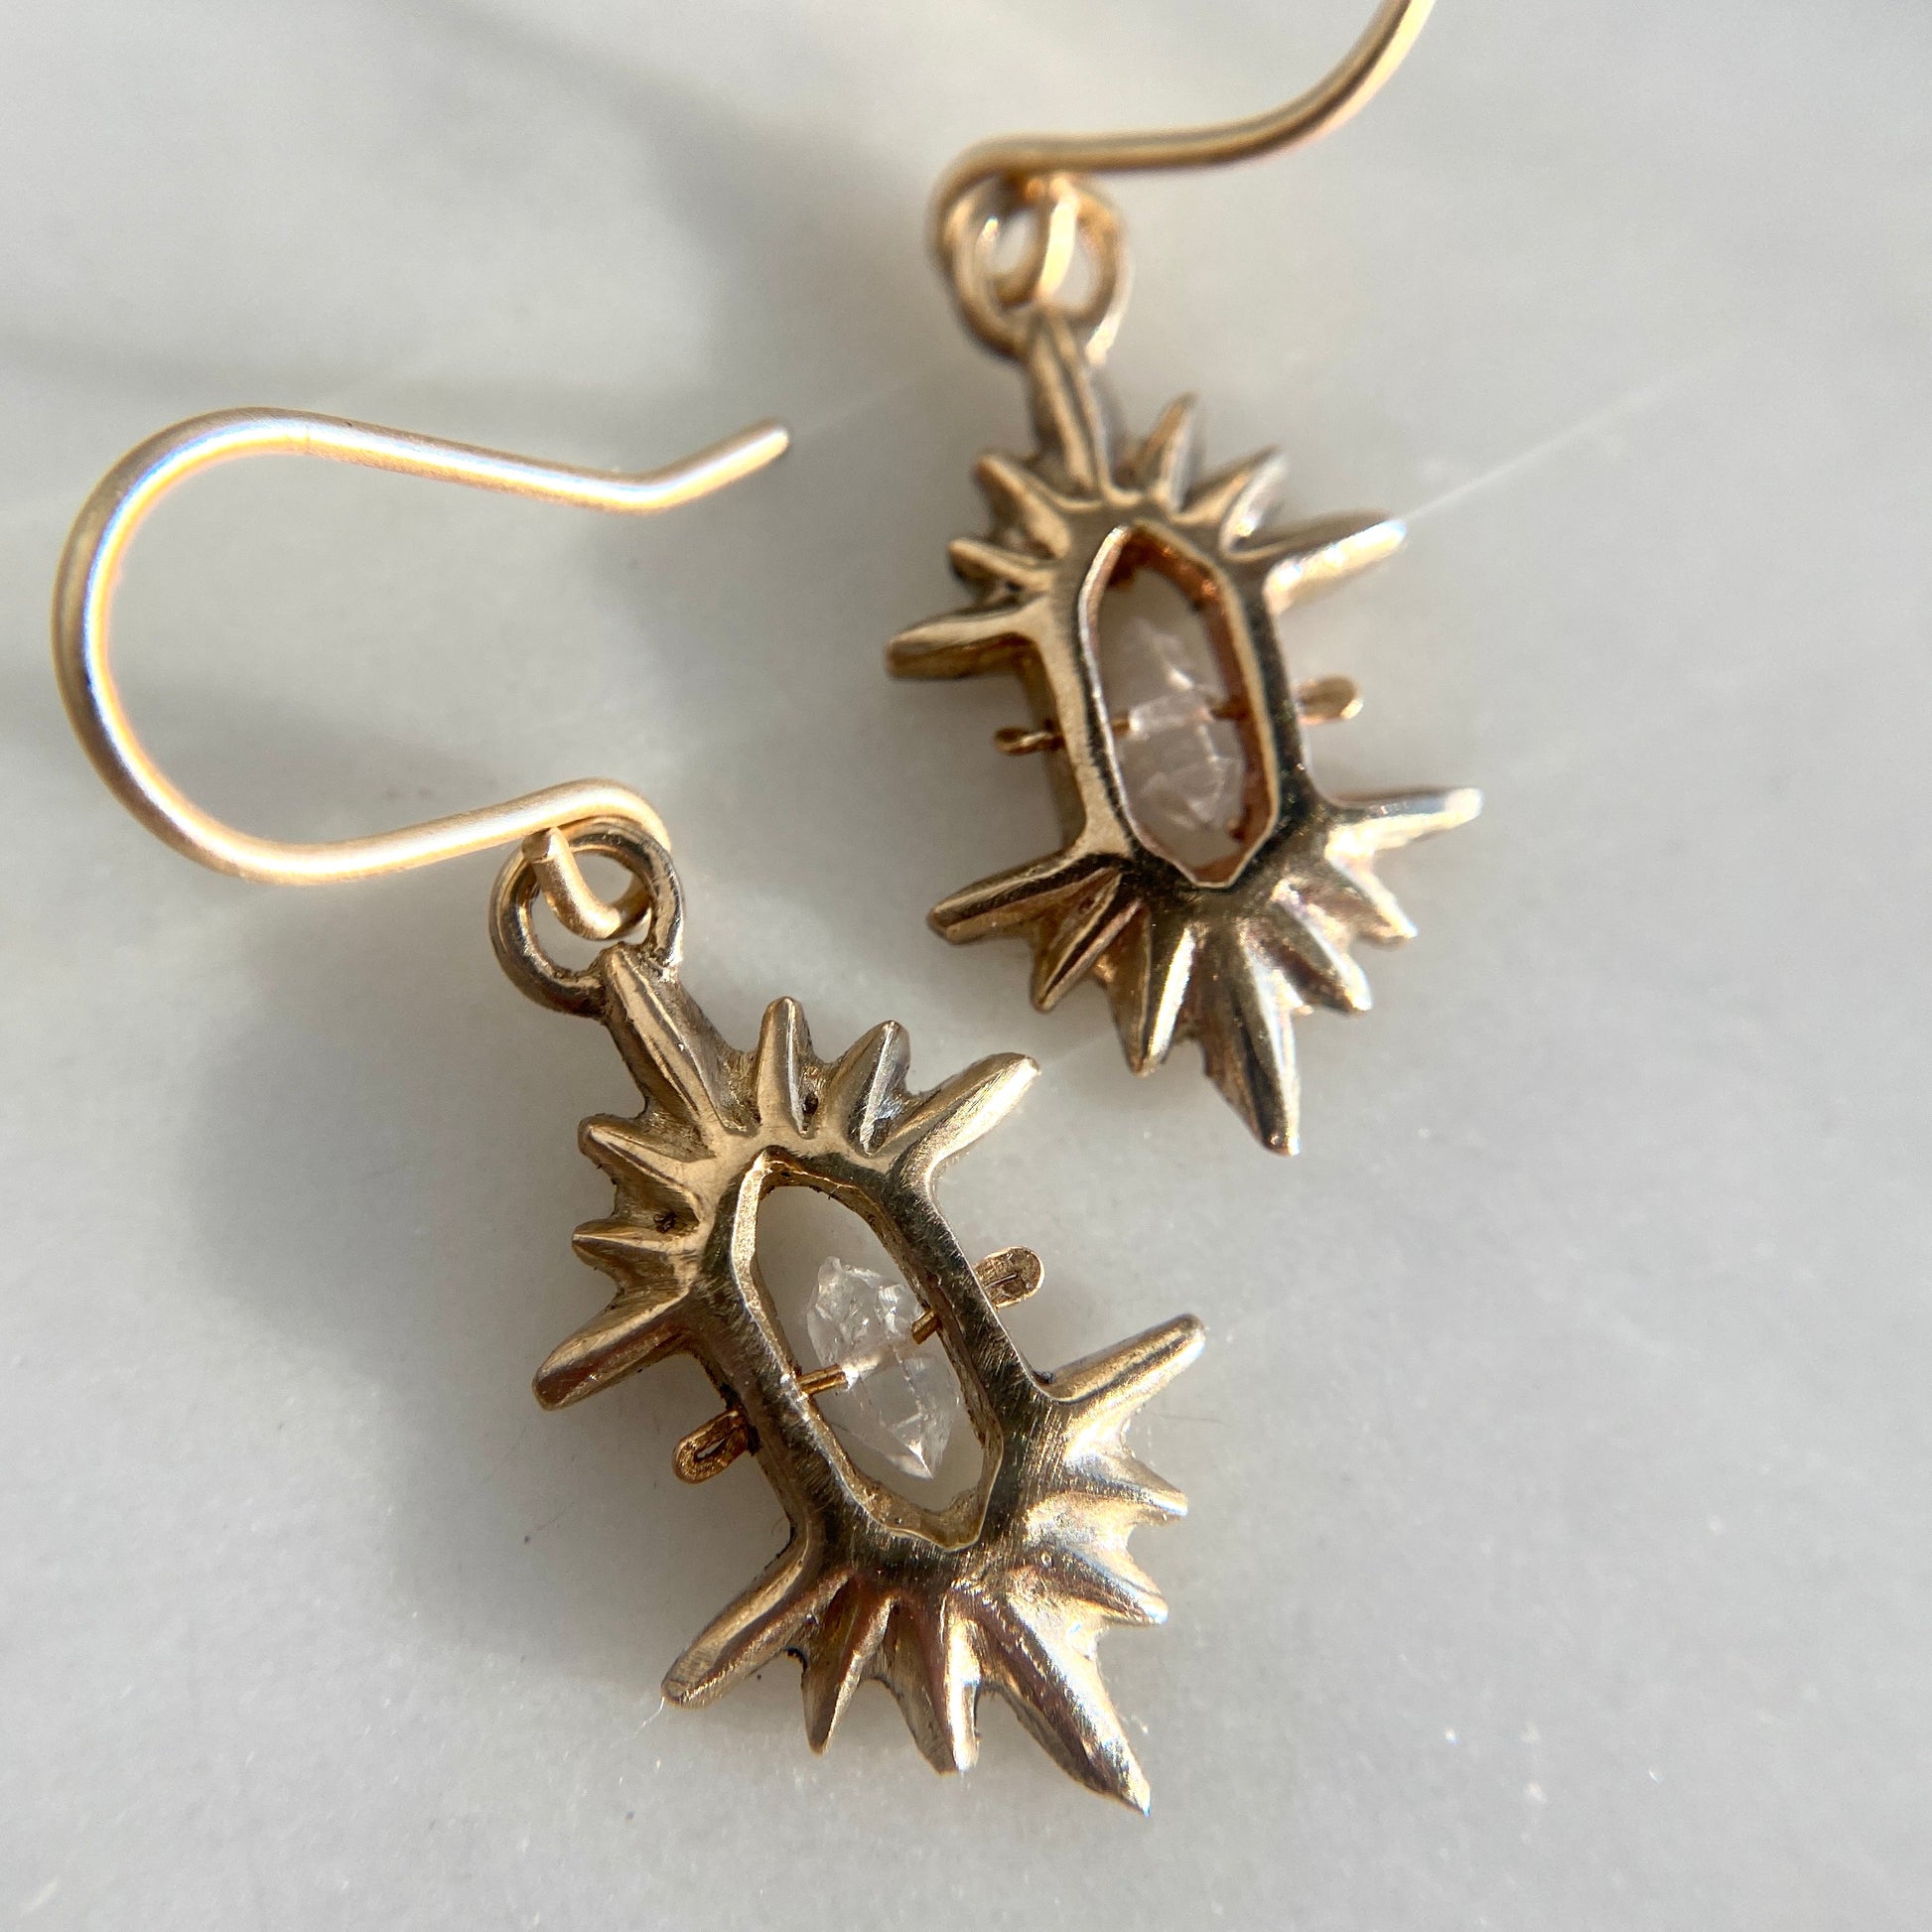 Crystal Sunburst Earrings in Gold tone bronze from Iron Oxide